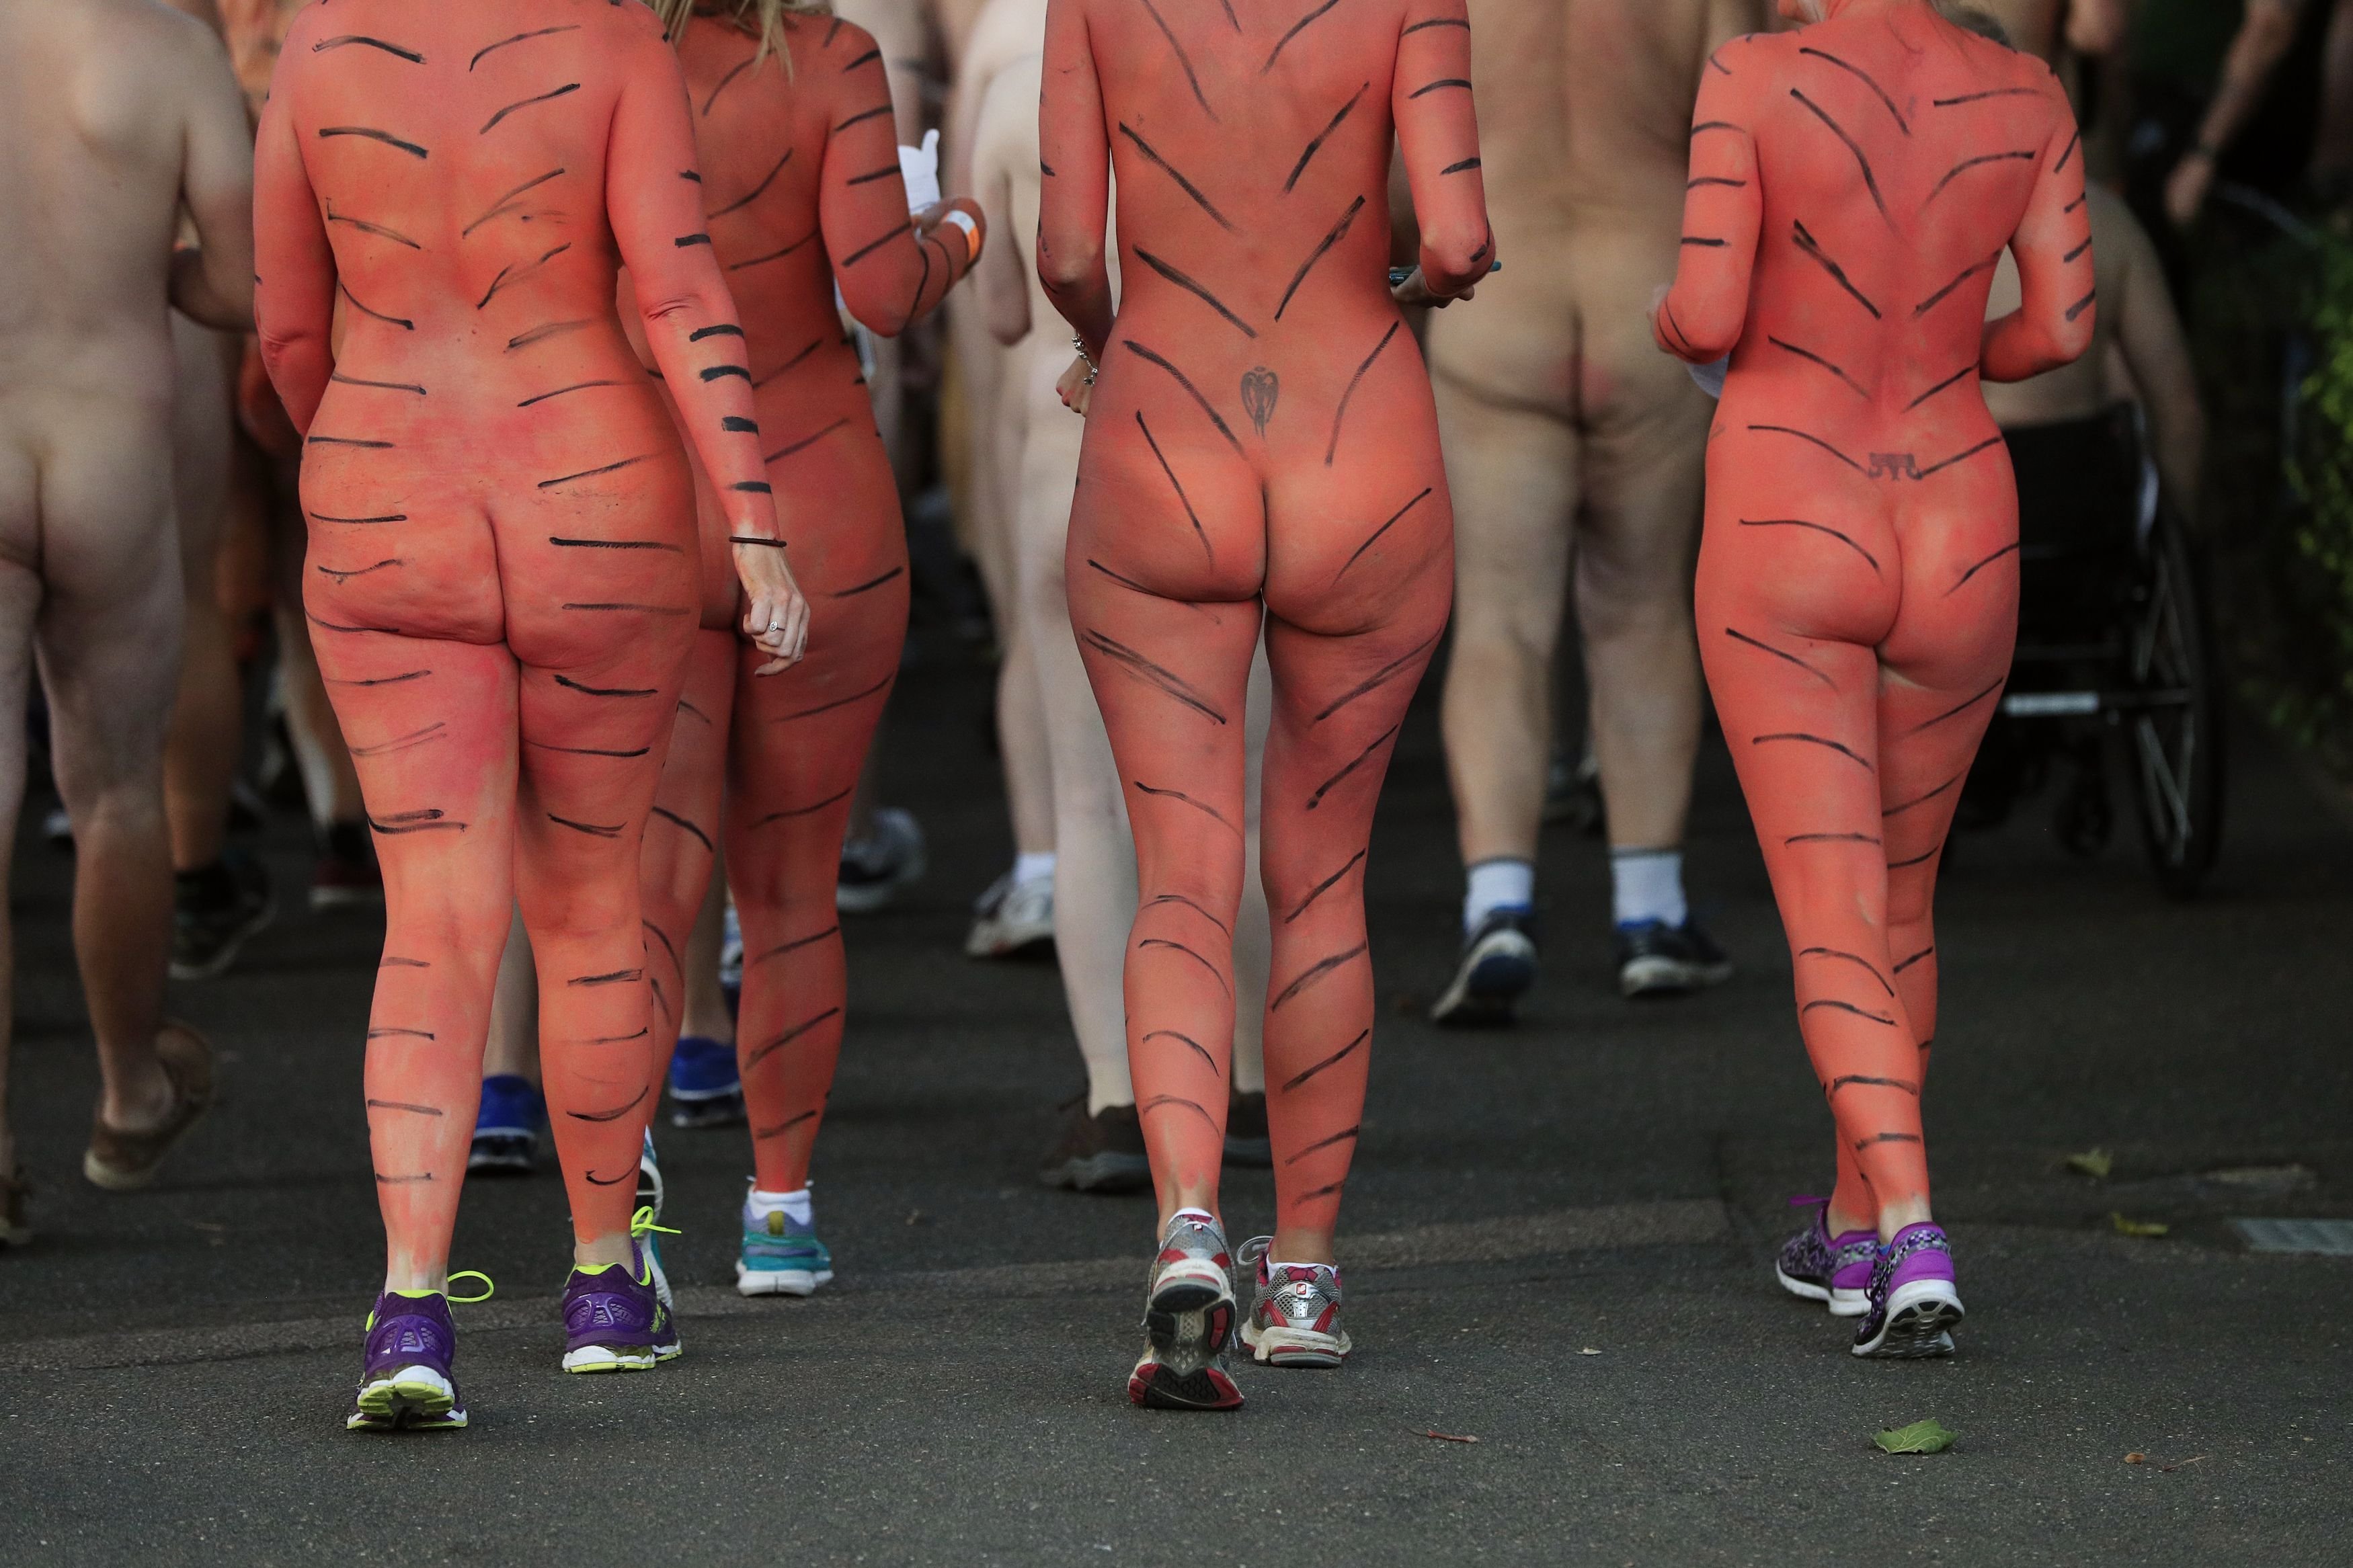 London Zoo Hosts Naked Fundraising Event Streak For Tigers (GRAPHIC PICTURES) HuffPost UK News photo